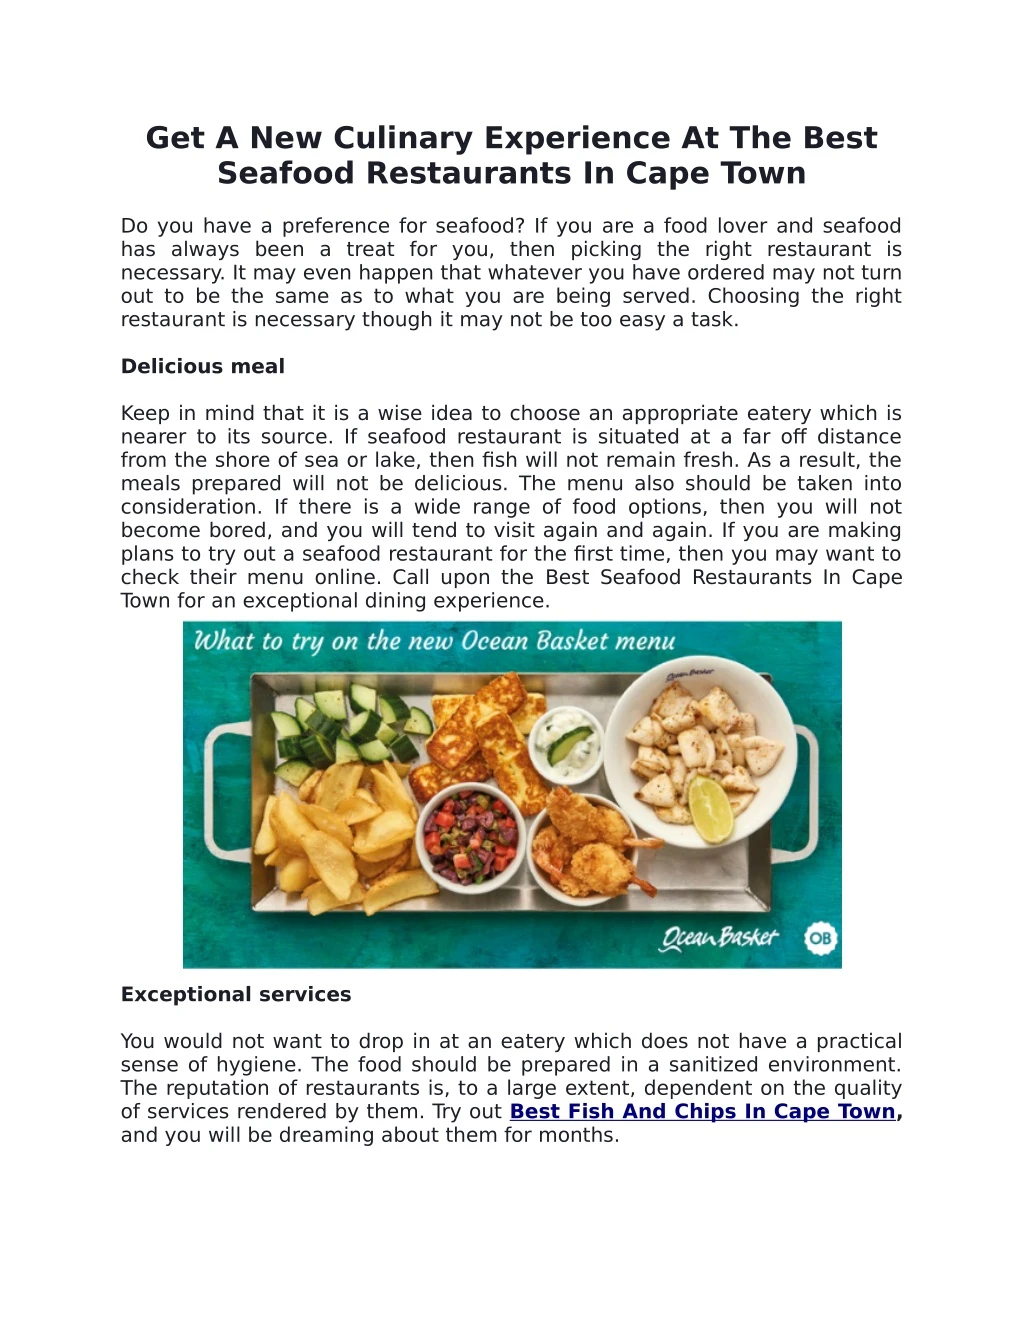 get a new culinary experience at the best seafood